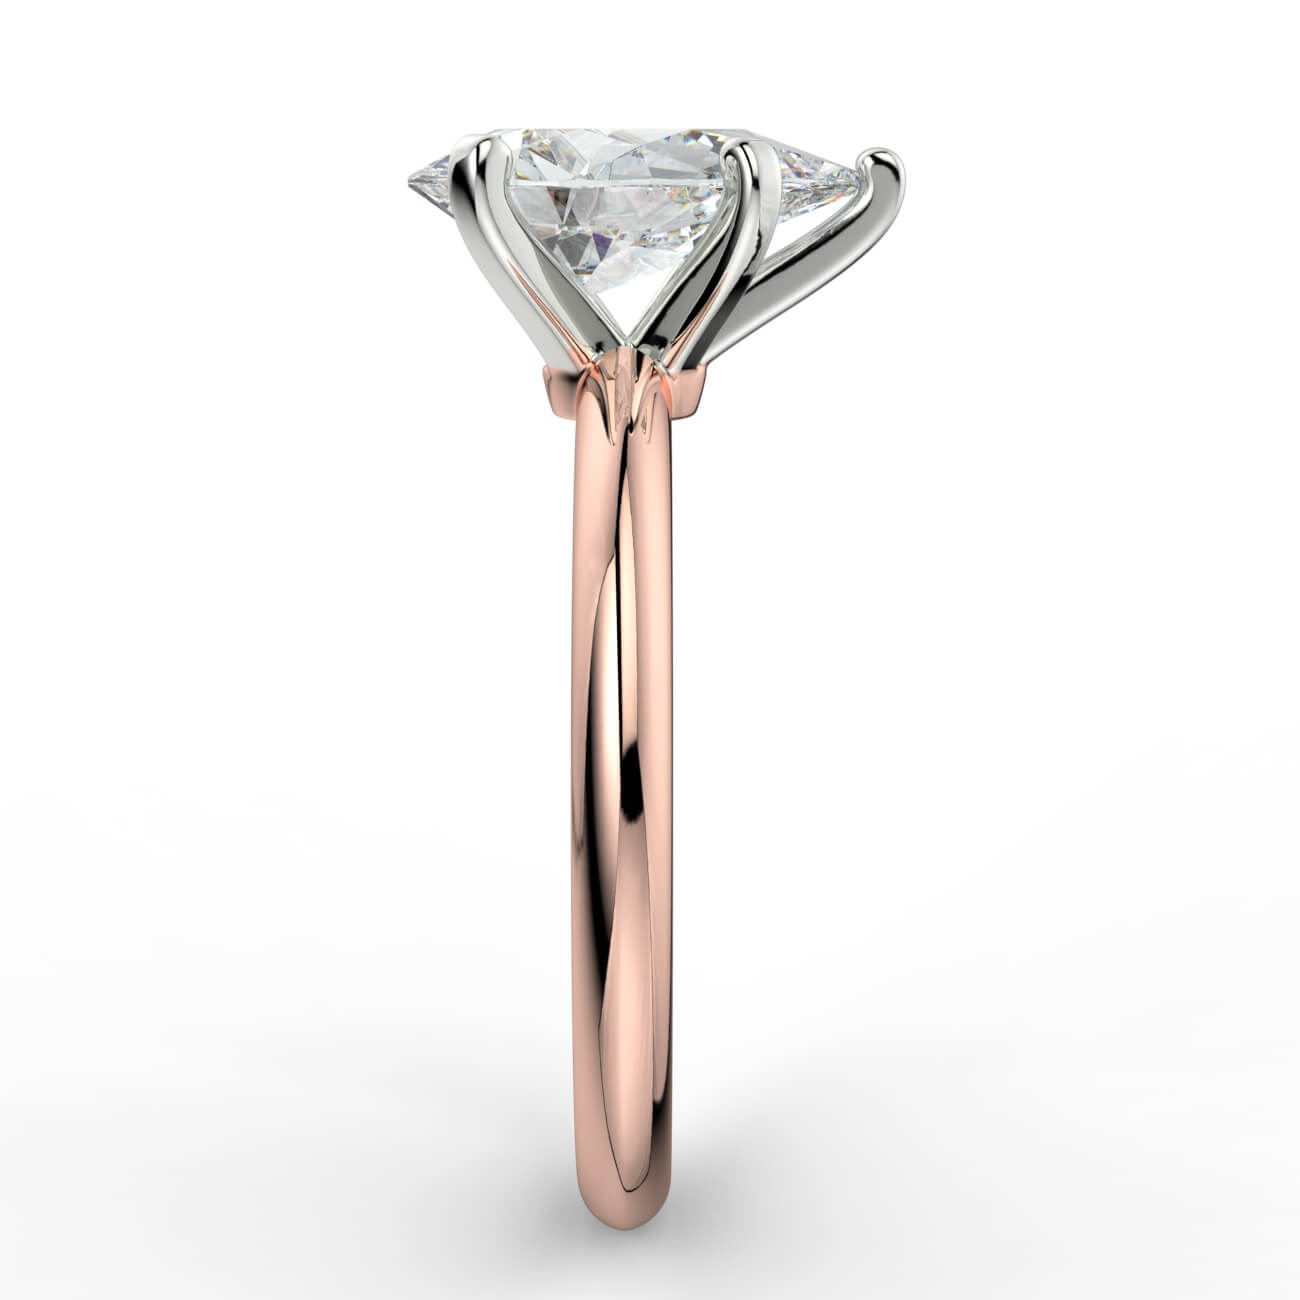 Knife-edge solitaire pear diamond engagement ring in rose and white gold – Australian Diamond Network